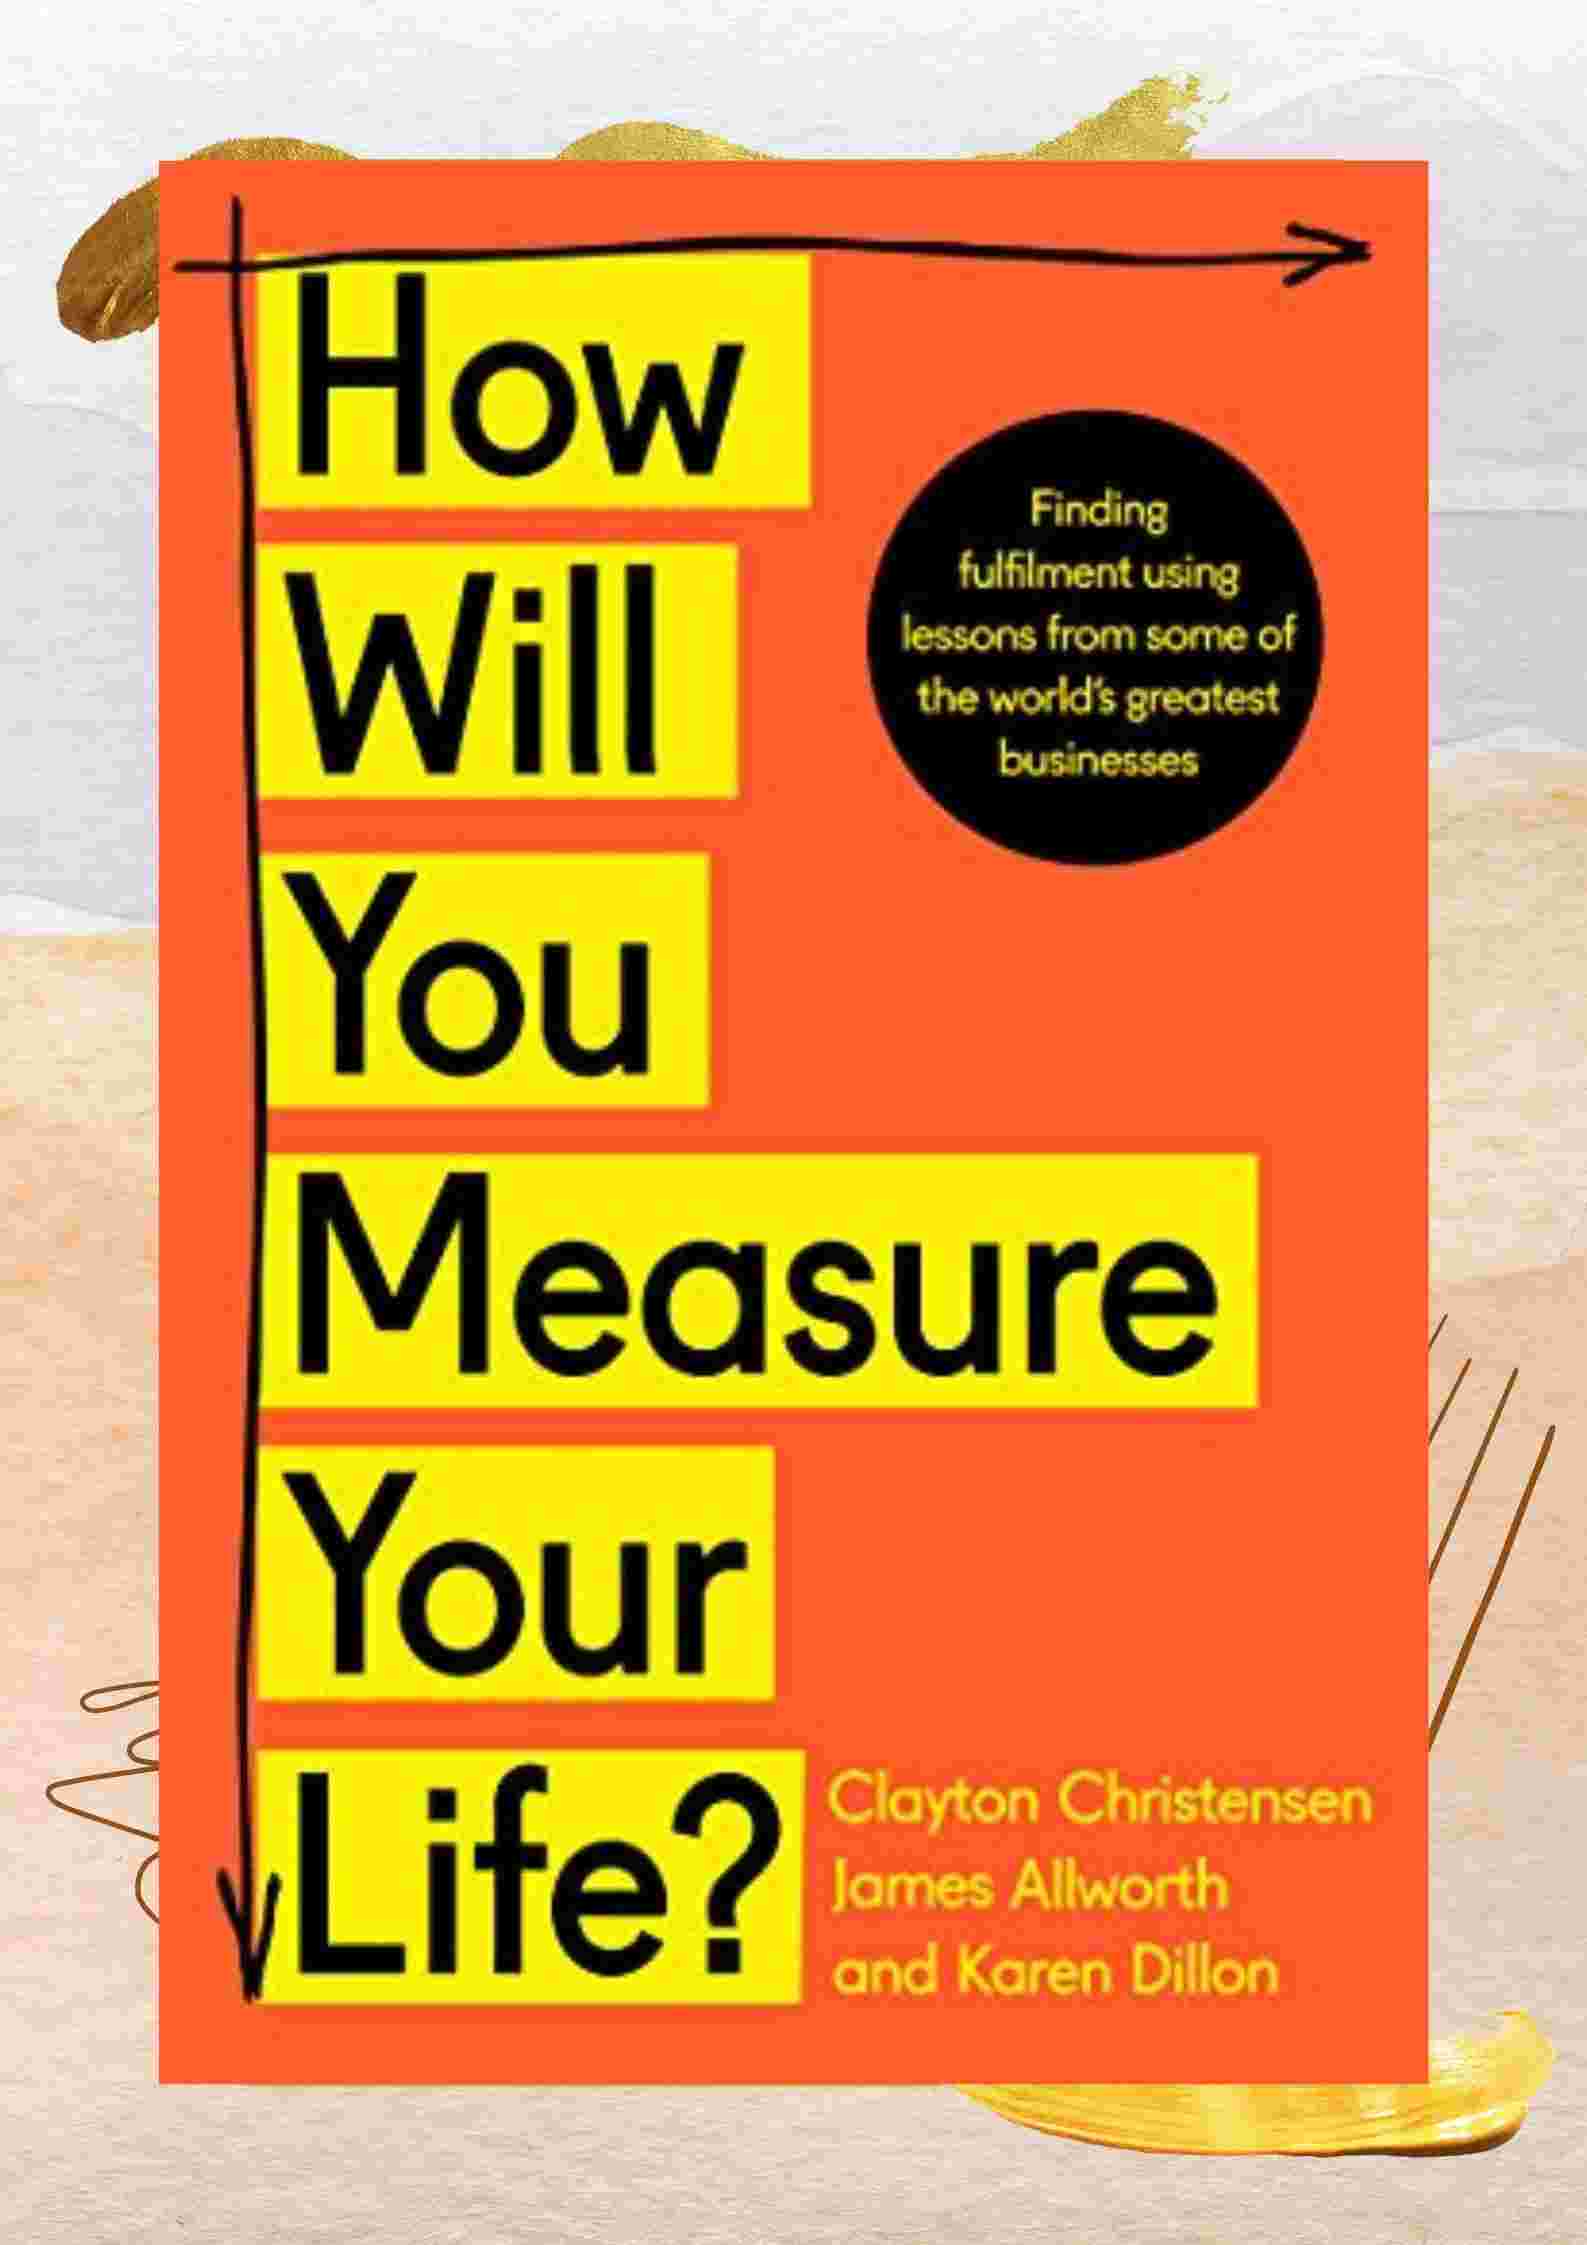 How will you measure your life summary